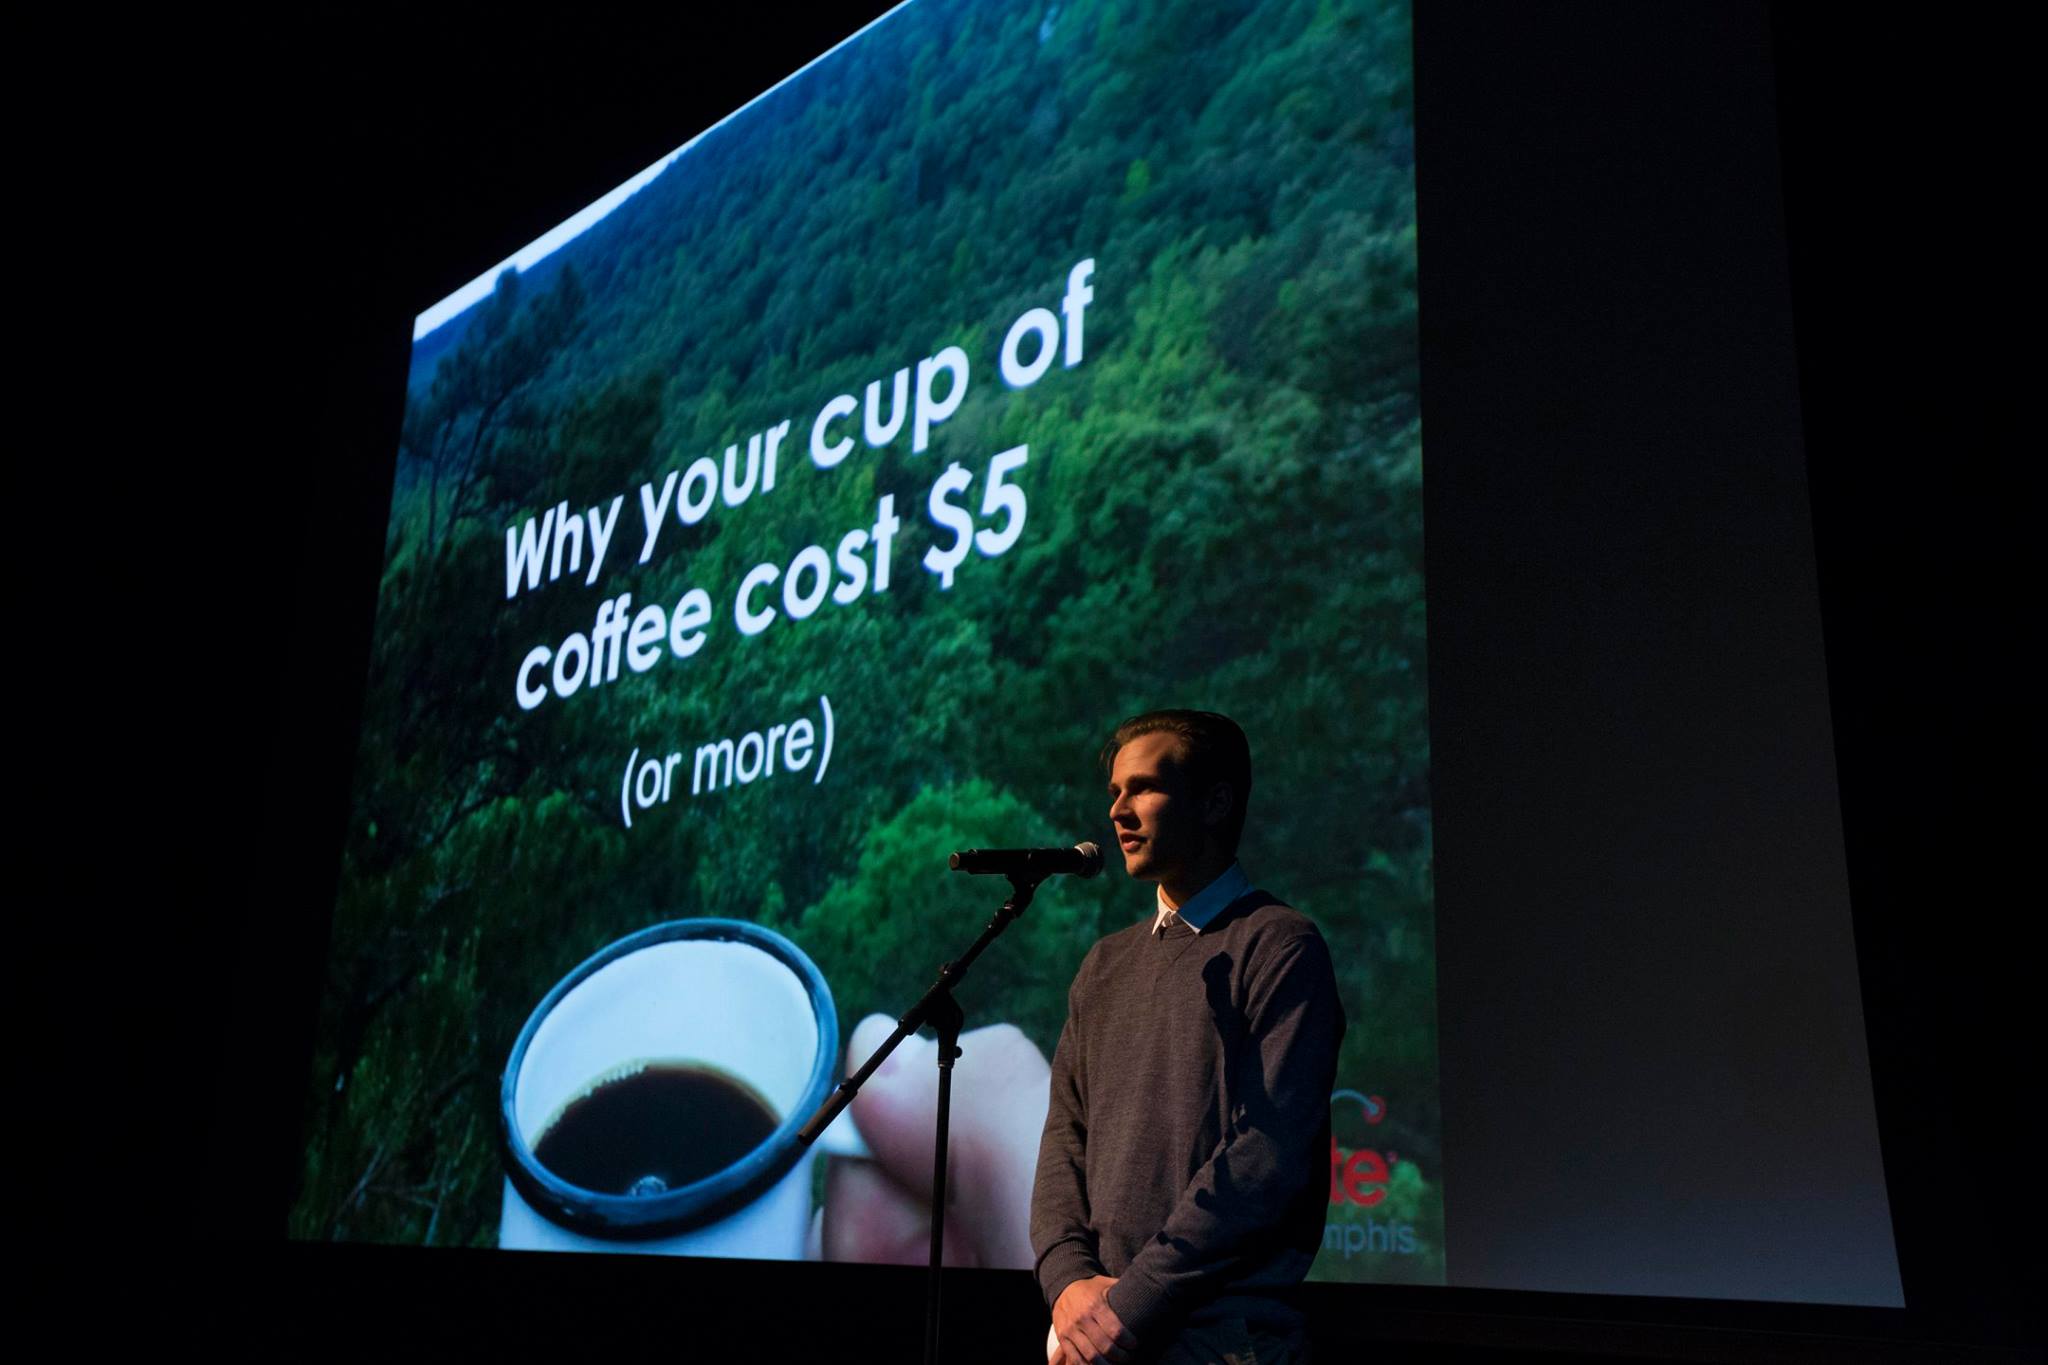 Brendan Larkin at Ignite Memphis, Vol. 9. delivering his talk "Why Your Cup of Coffee Costs $5"